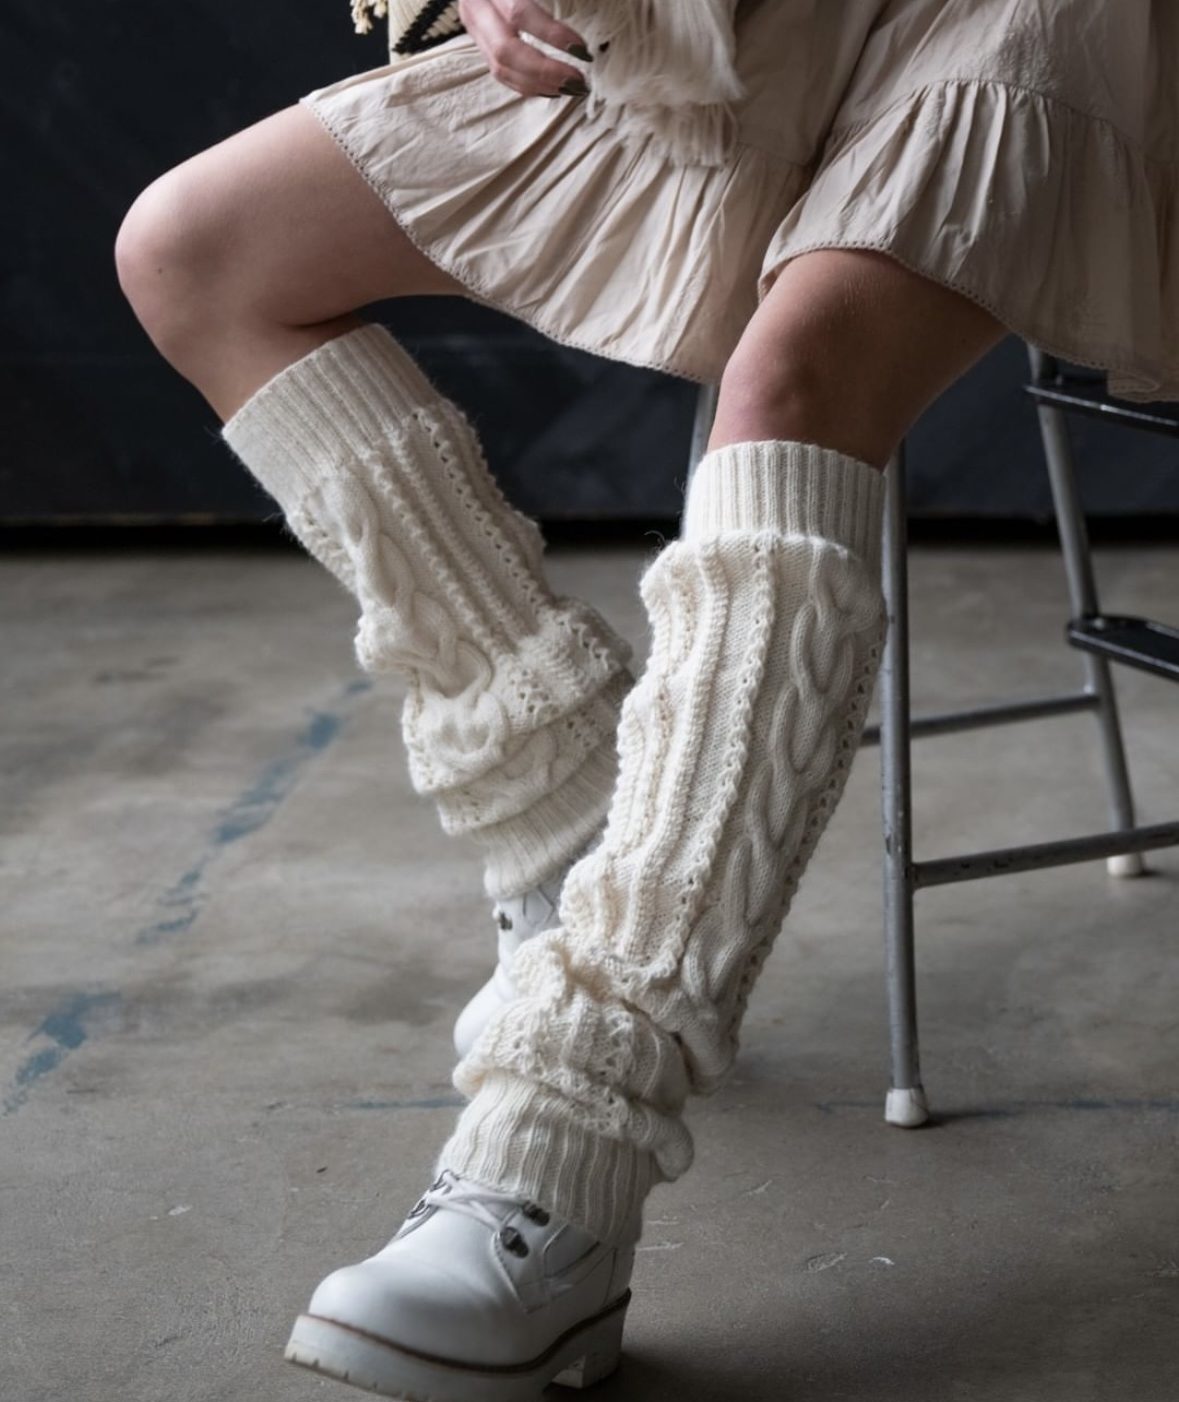 The 80s Called…but They Are Not Getting These Legwarmers Back